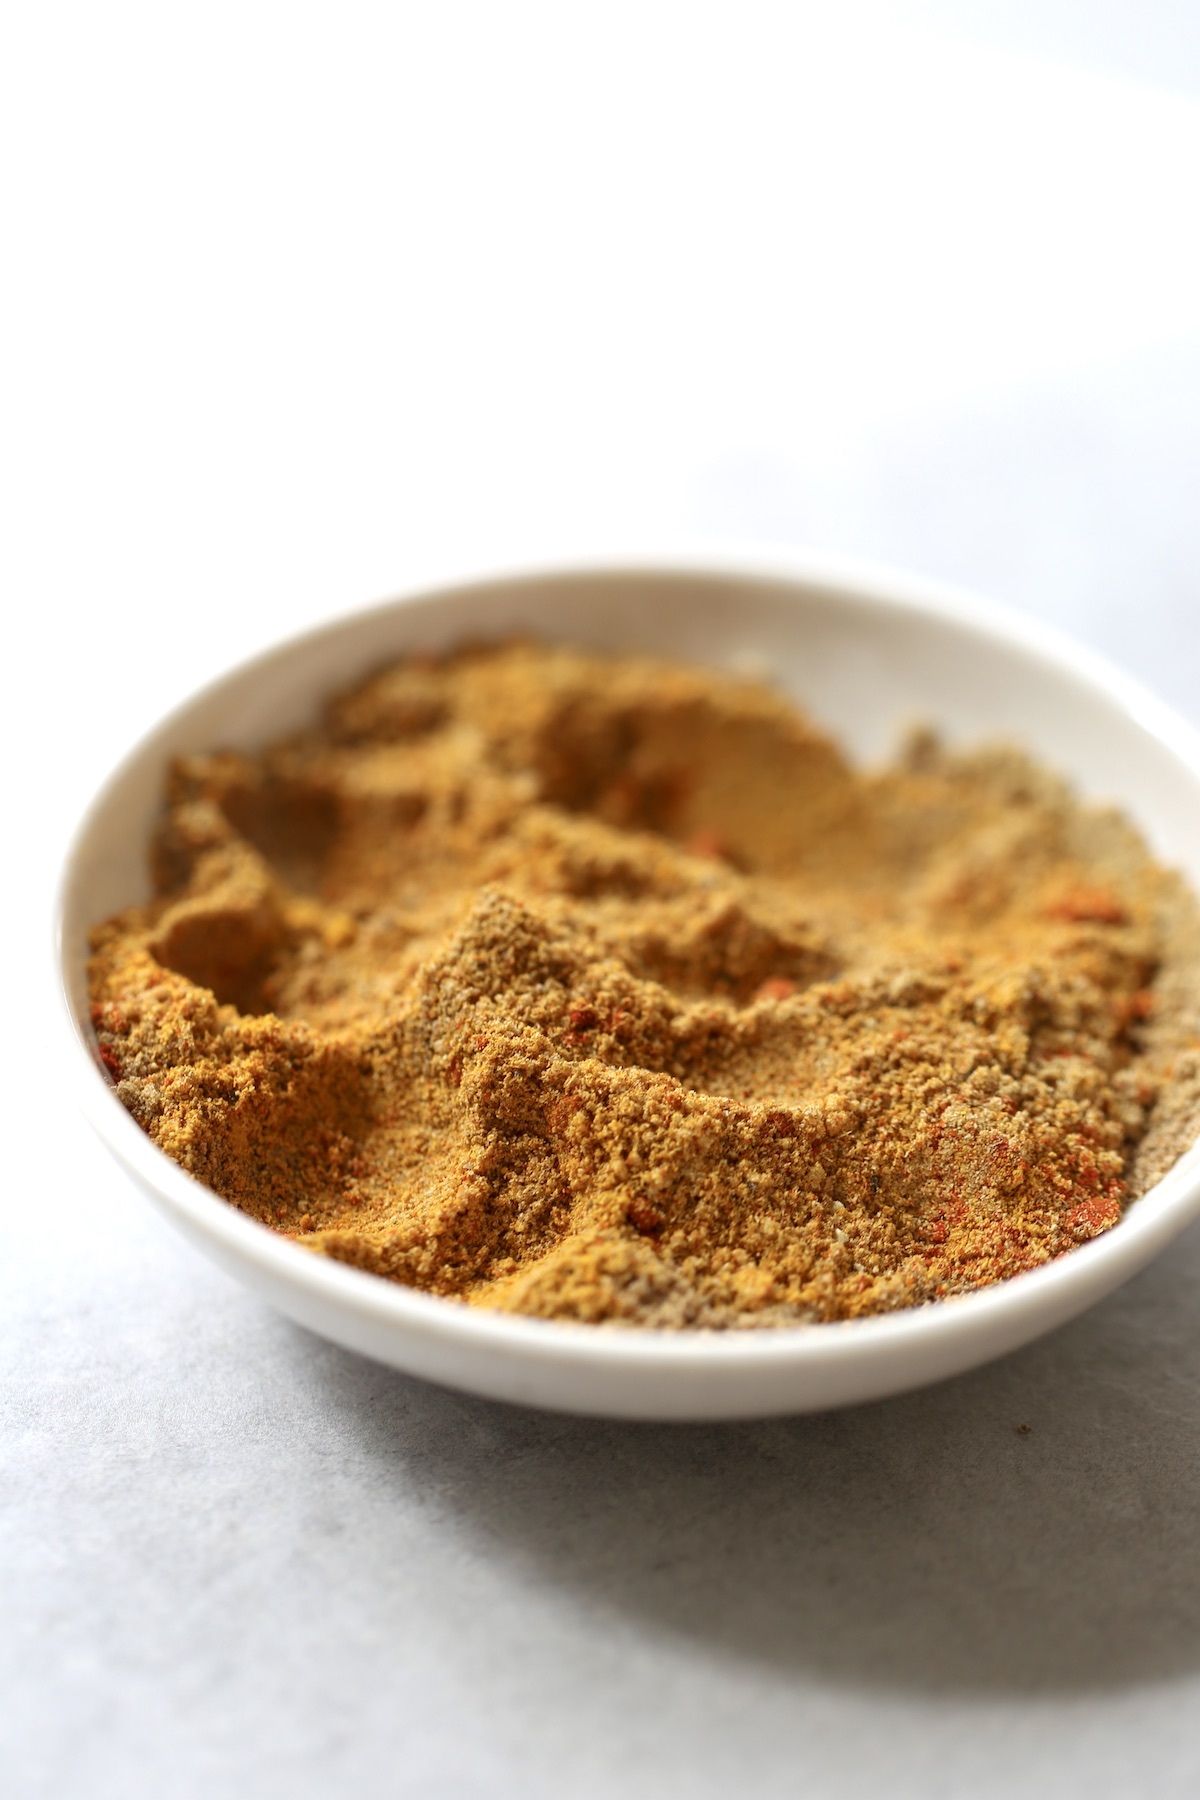 A blend of orange and brown spices in a small white bowl.